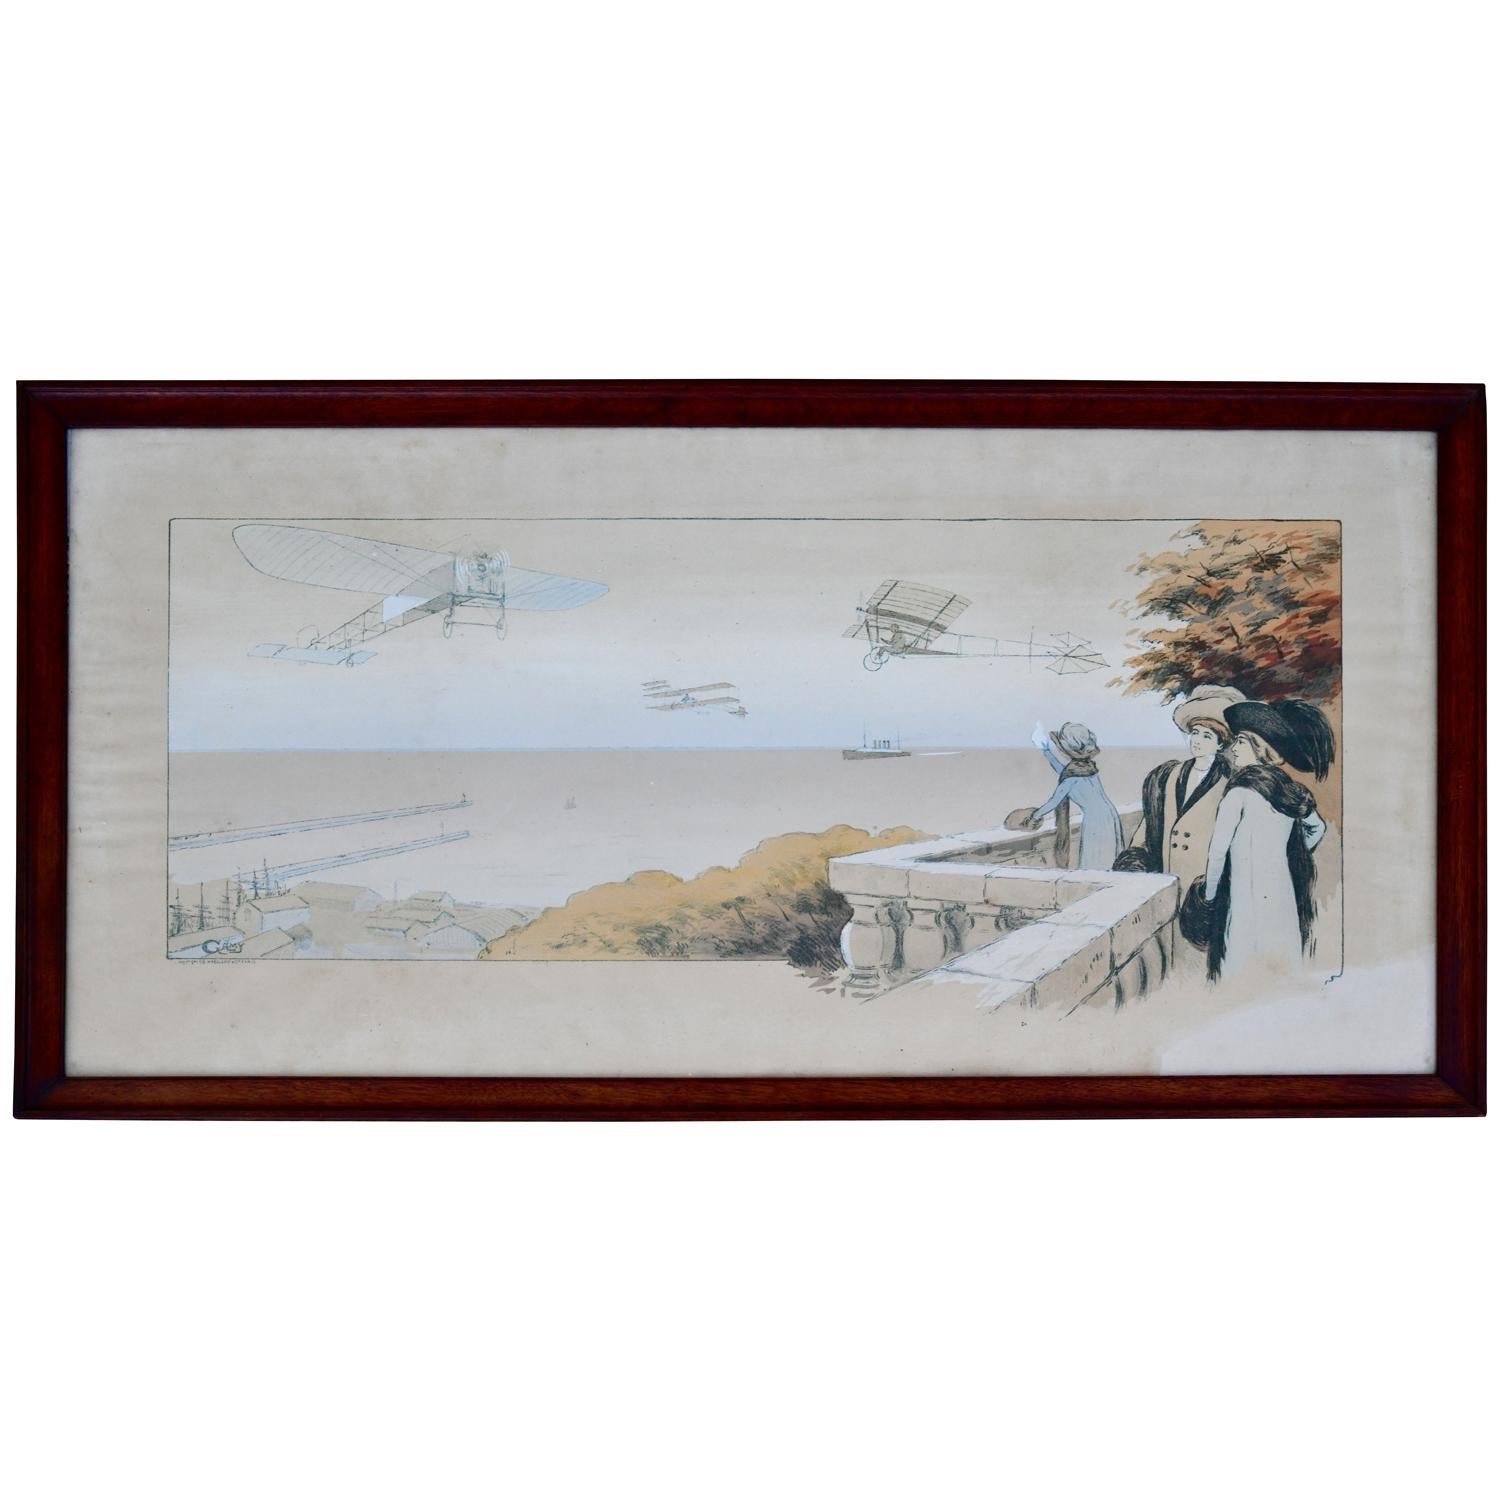 Pair of Art Nouveau lithographs with airplanes, boats and spectators by Marguerite Montaut.
France, 1883-1936.
Signed Gamy, Mabileau & Co. Paris. 
Stone lithographs with gouache hand colored details. 
Original glass and frame. 
One of the